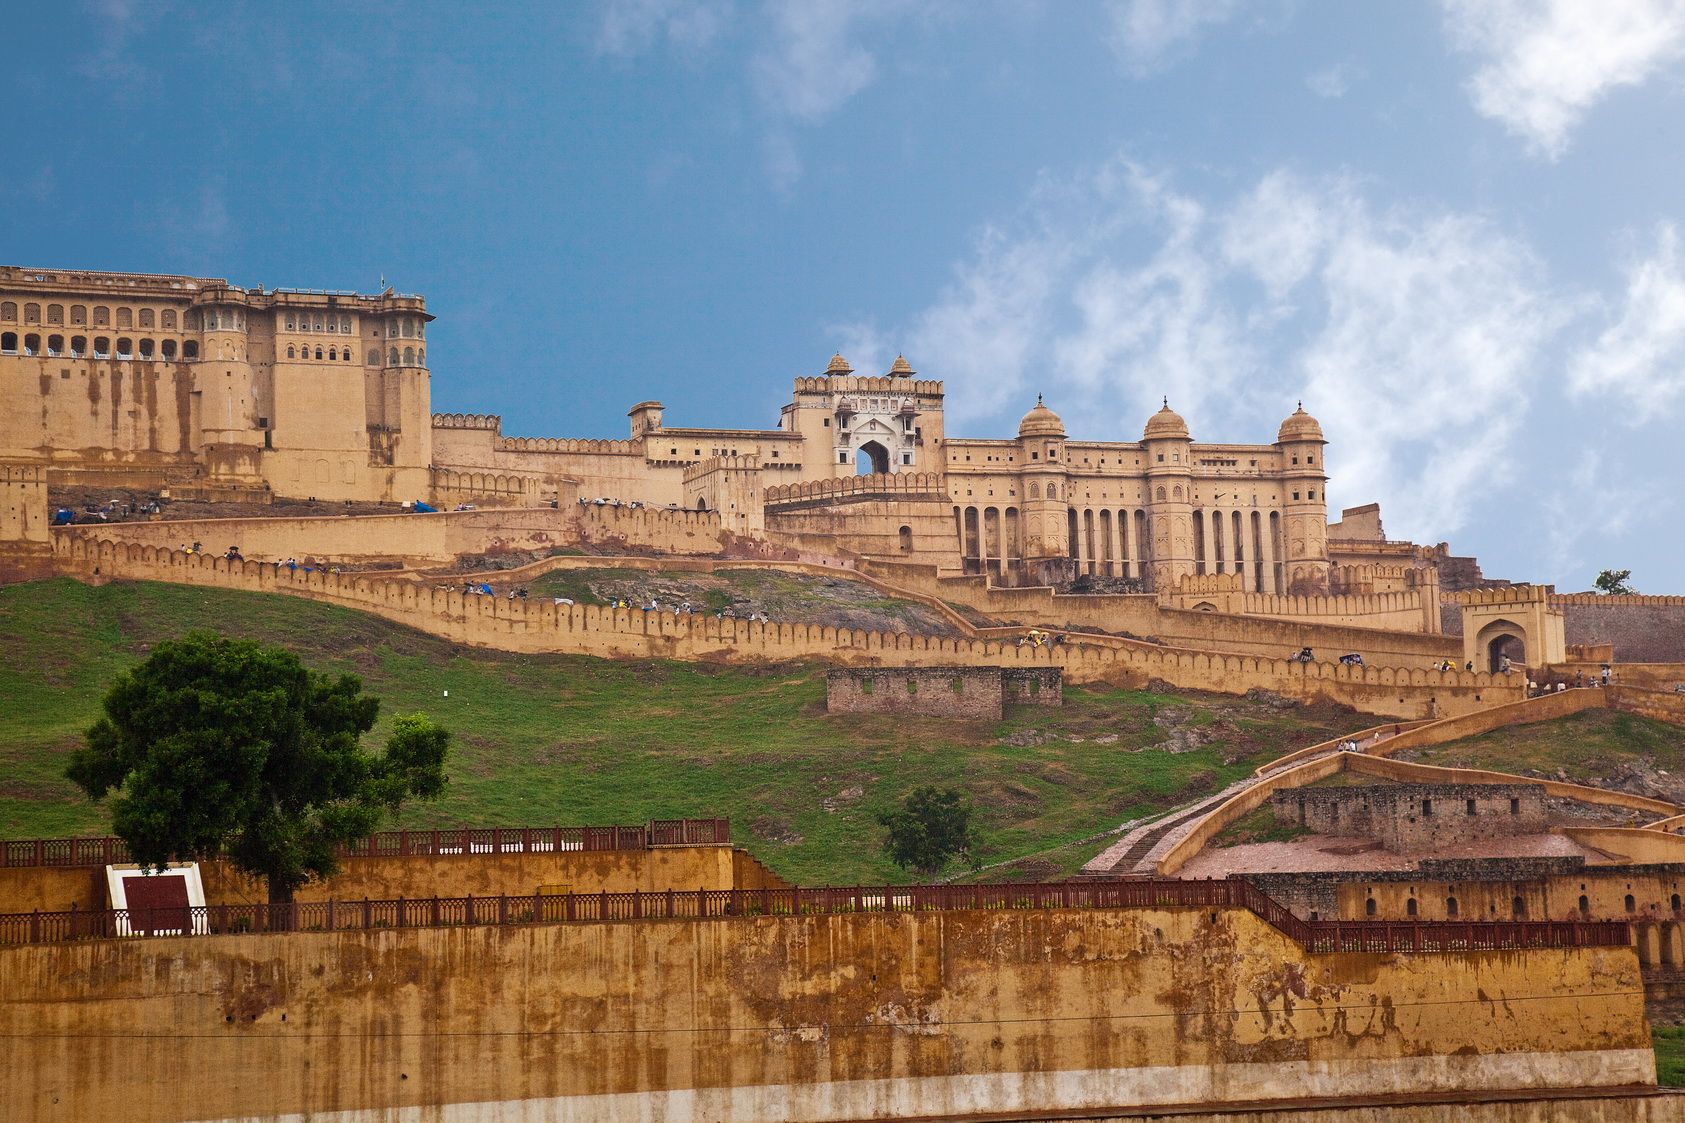 AMBER FORT Photo, Image and Wallpaper, HD Image, Near